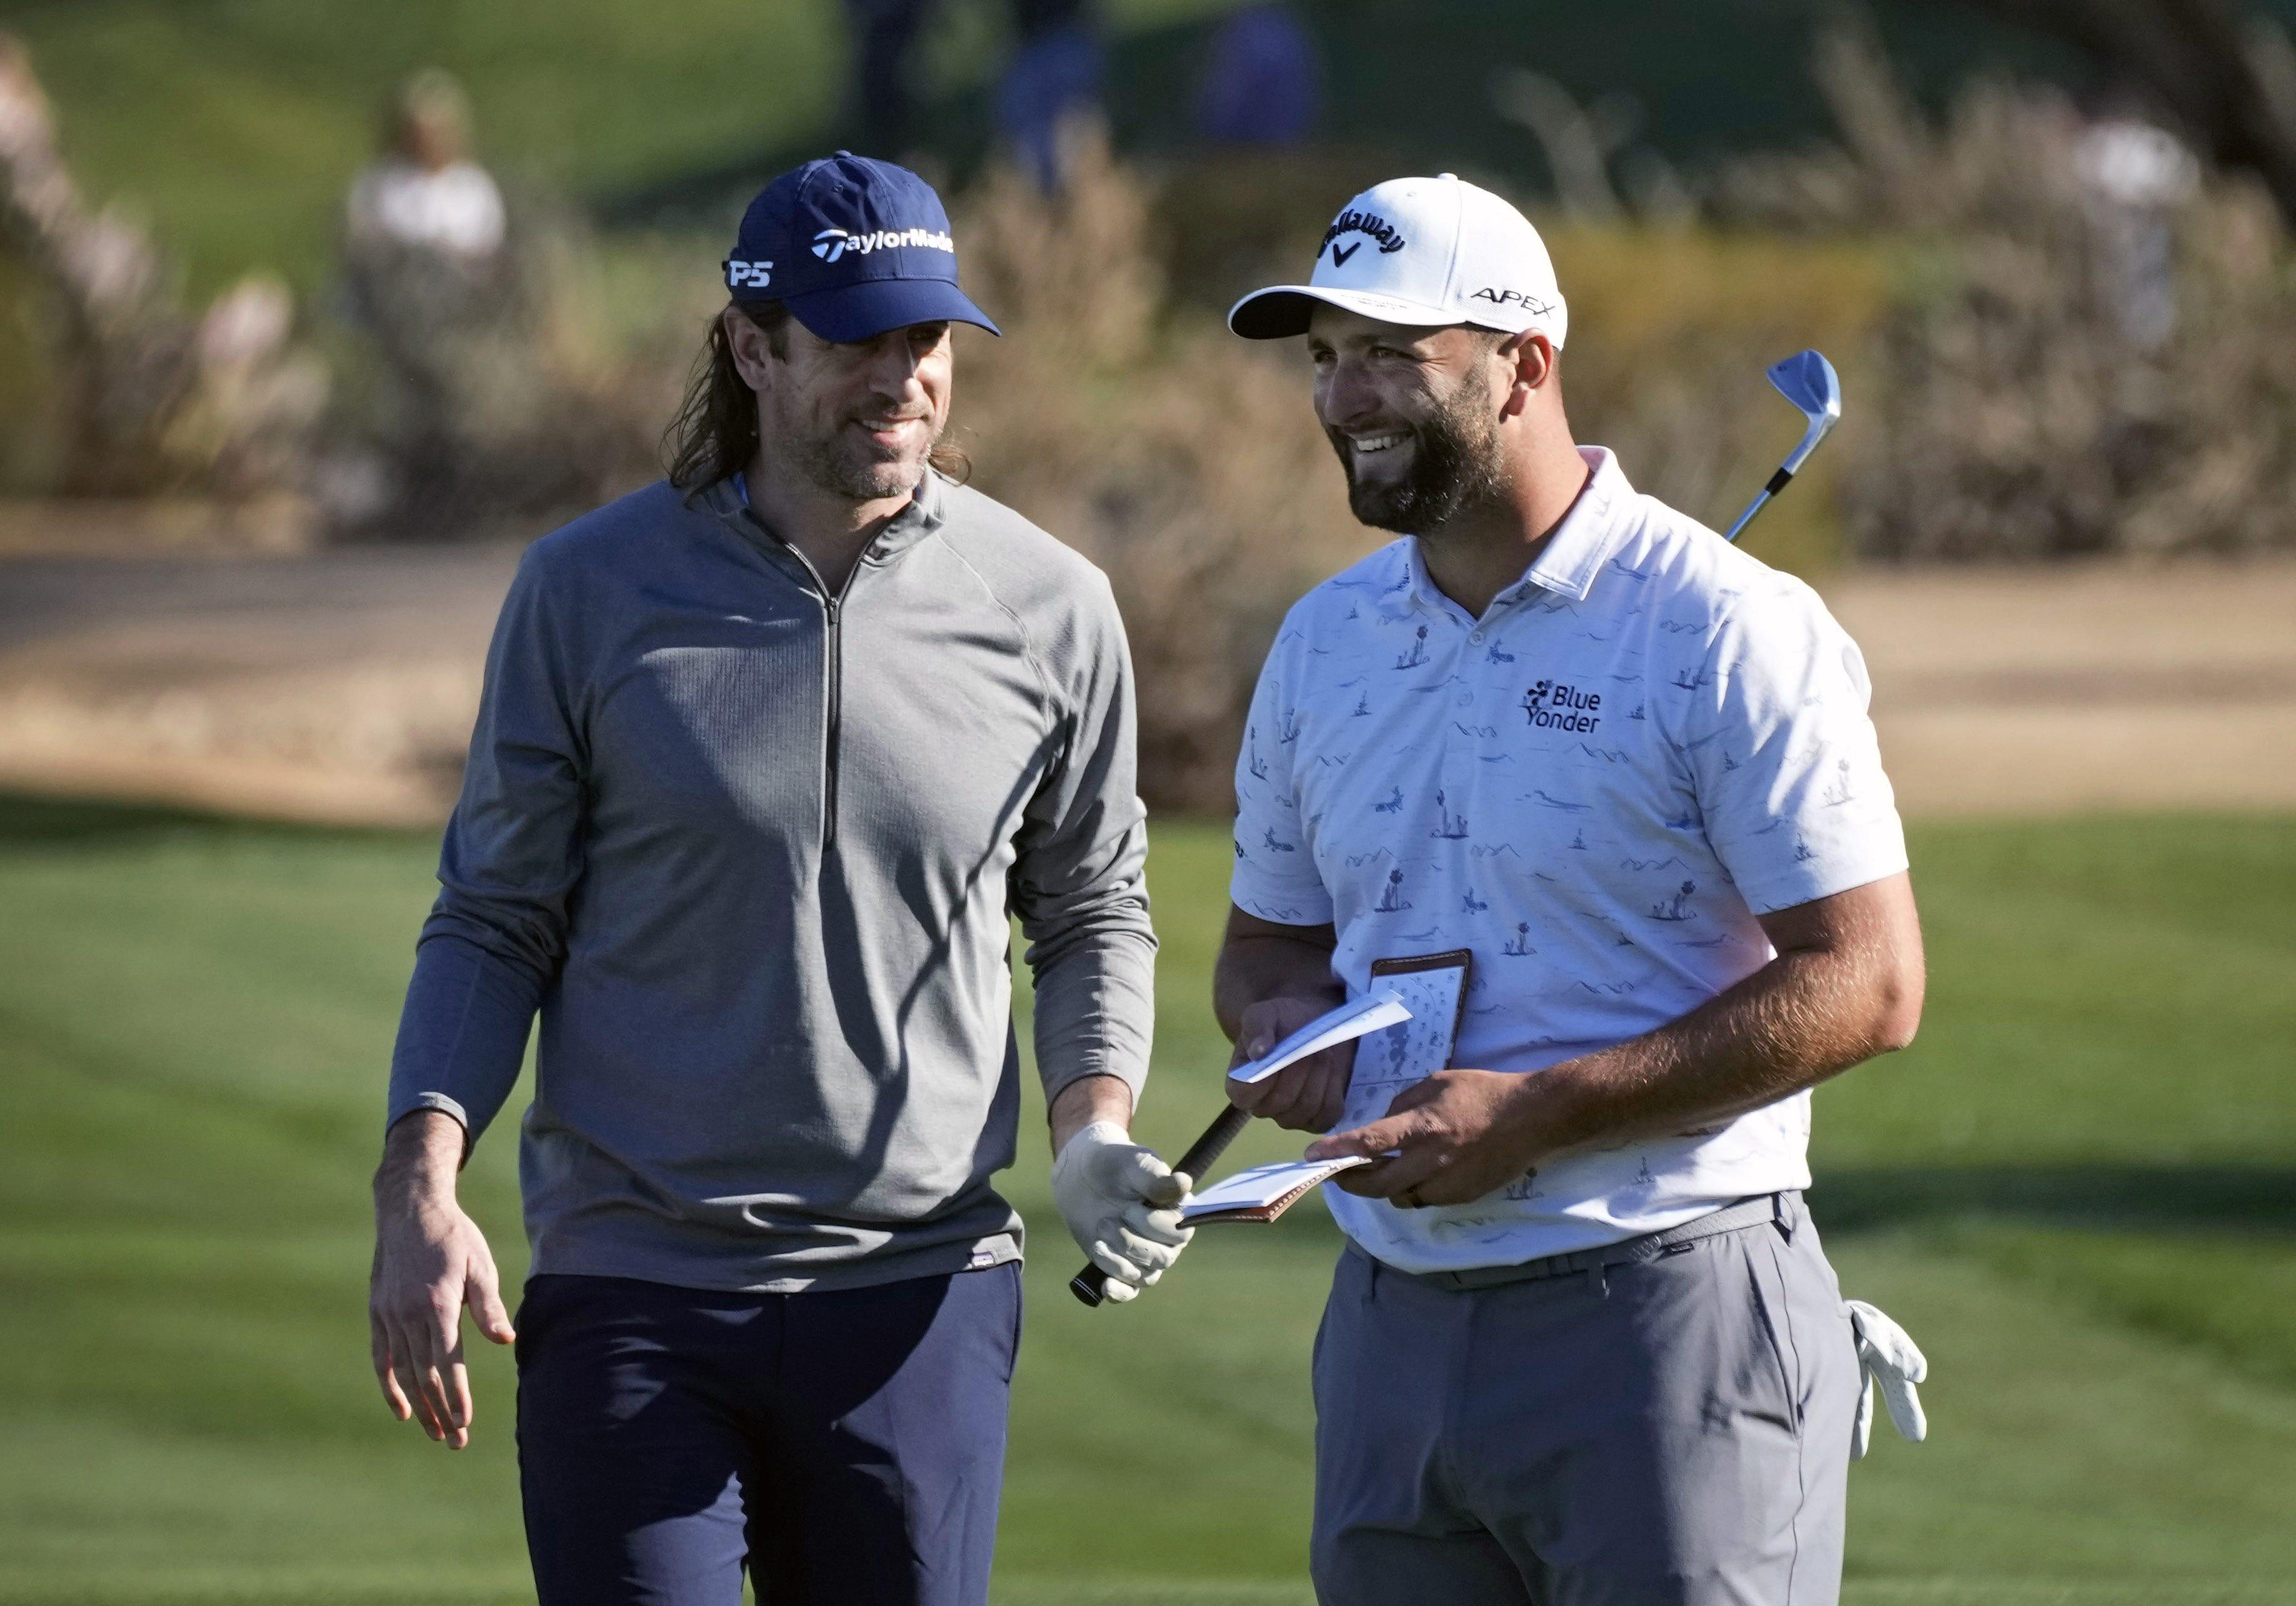 The Match 2022: Golf Odds, Predictions, Date, Time, TV and Format for Brady-Rodgers vs Mahomes-Allen